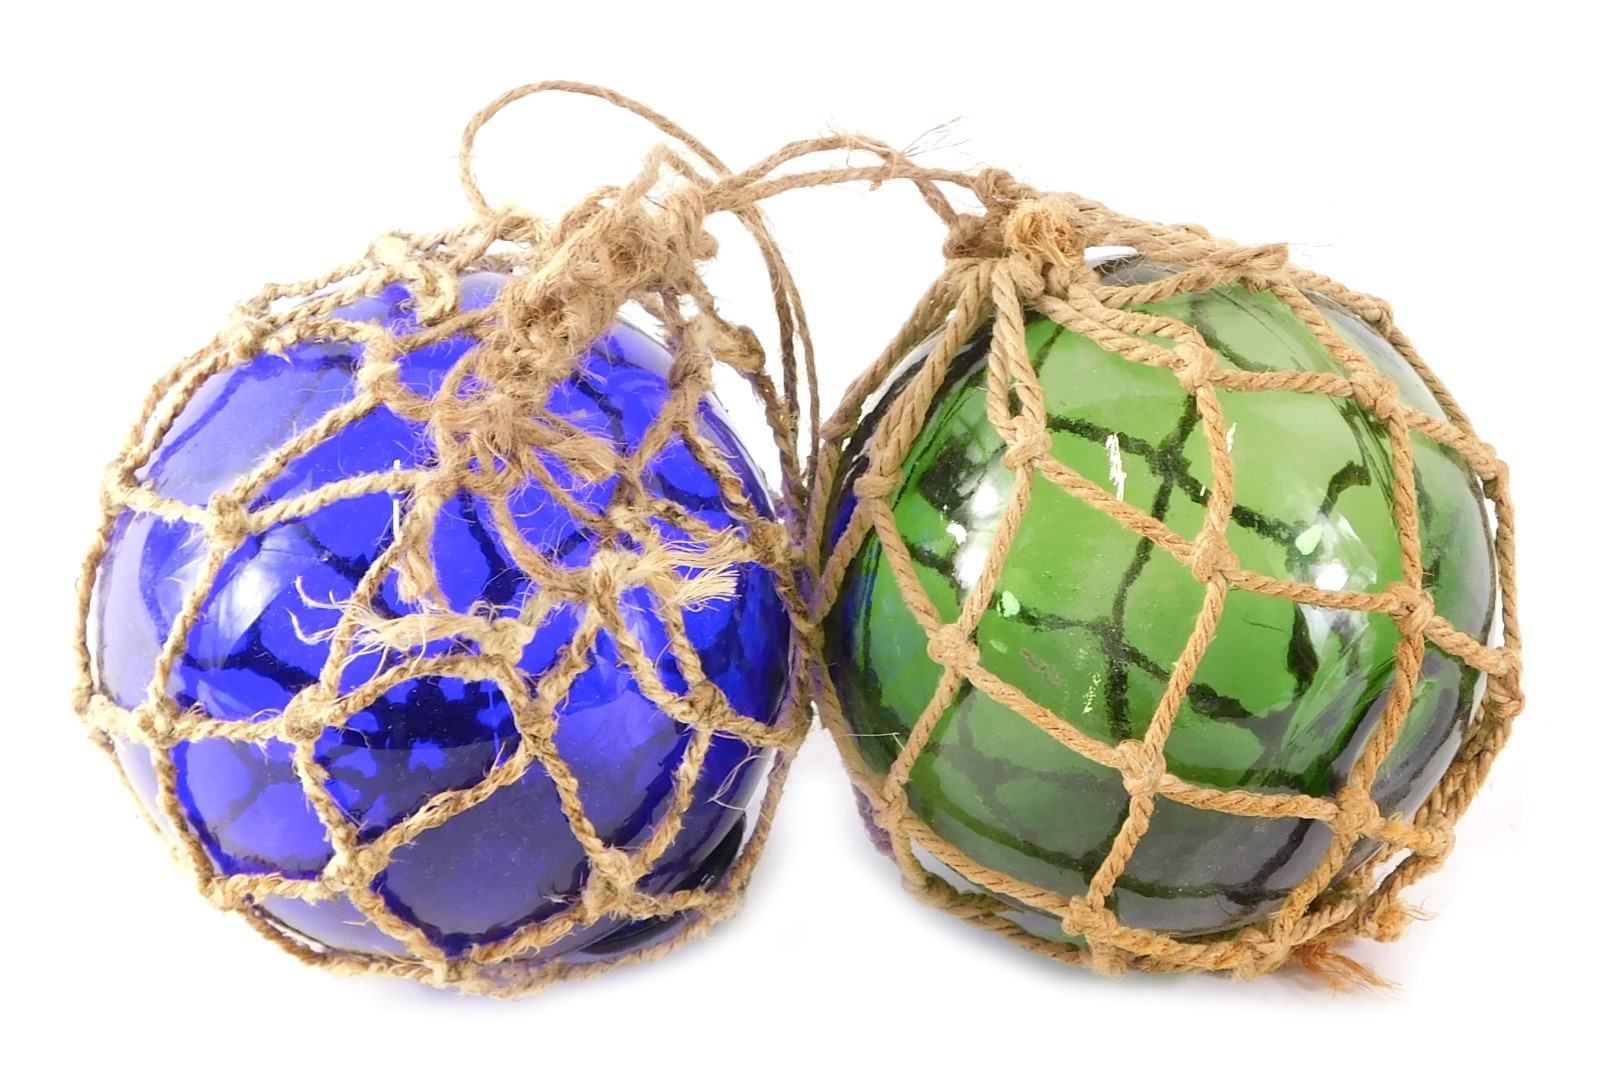 Two coloured glass fishing floats, with string binding.